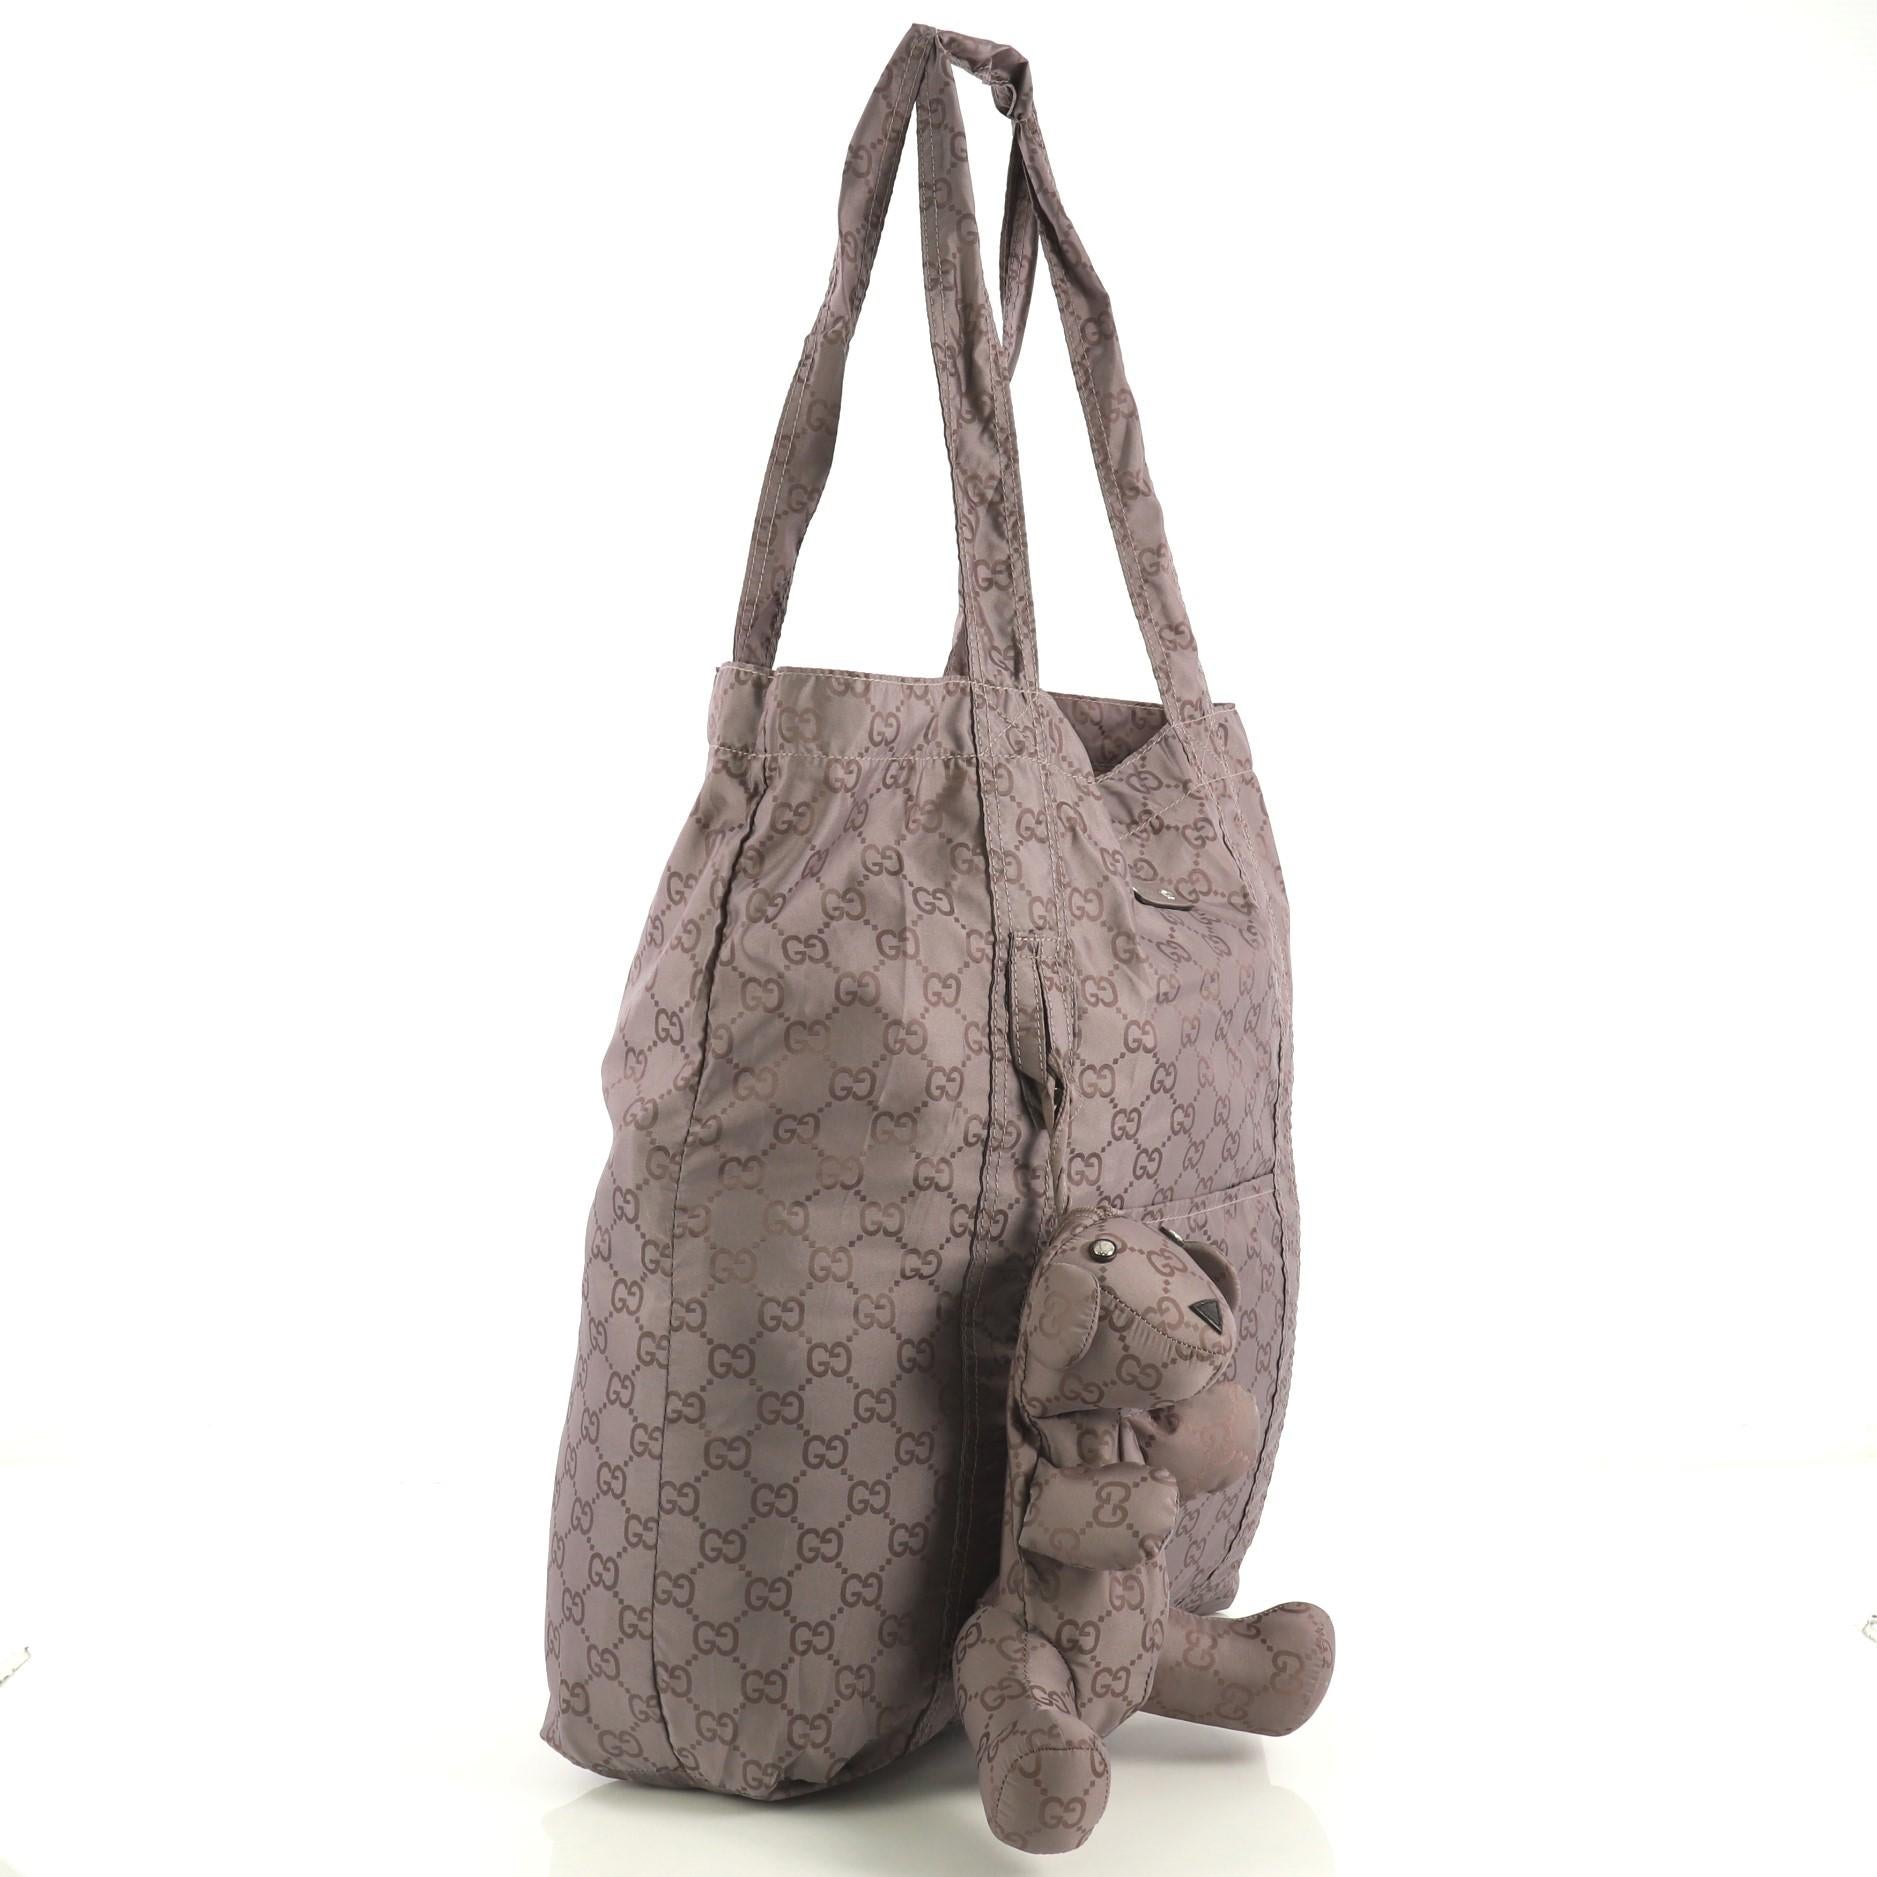 This Gucci Bear Charm Tote Guccissima Nylon Large, crafted from neutral guccissima nylon, features dual flat handles, bear charm, and silver-tone hardware. It opens to a neutral nylon interior. 

Estimated Retail Price: $825
Condition: Excellent.